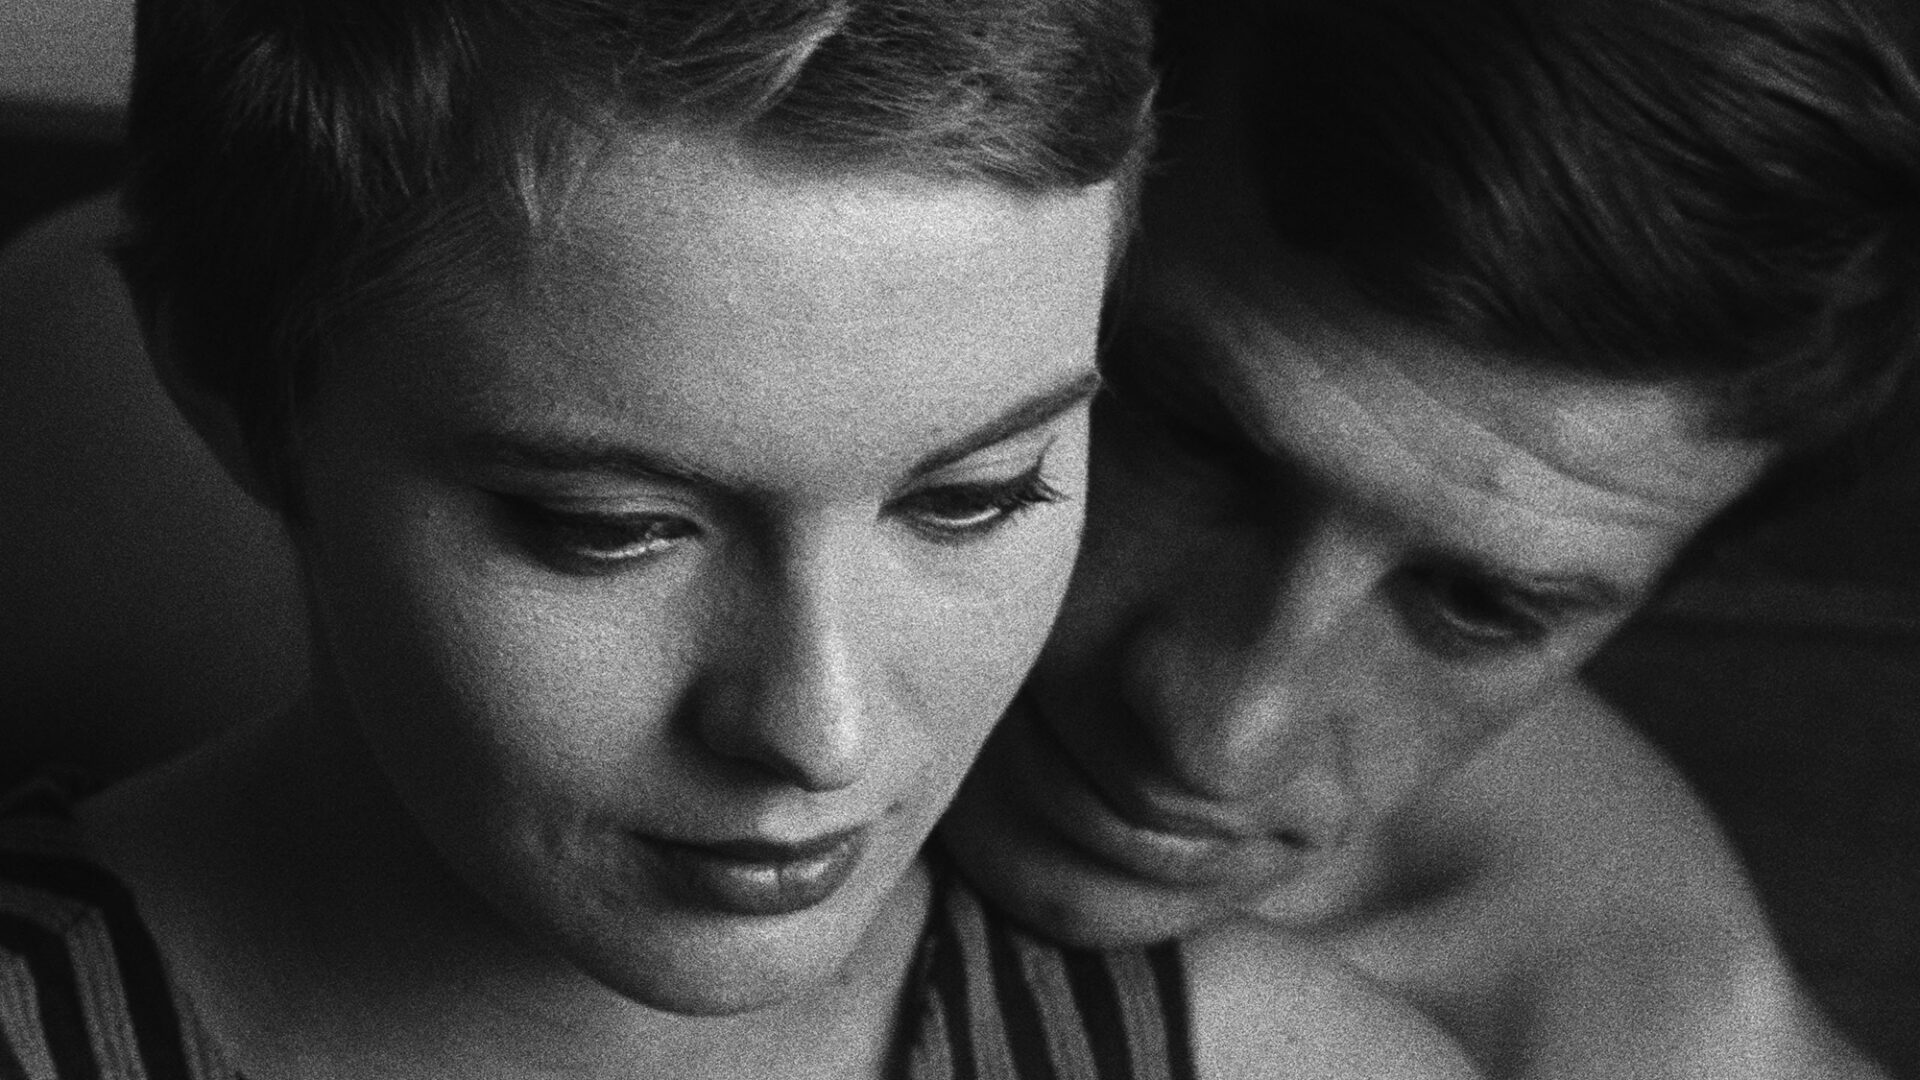 Breathless 2 Courtesy Rialto Pictures Studiocanal